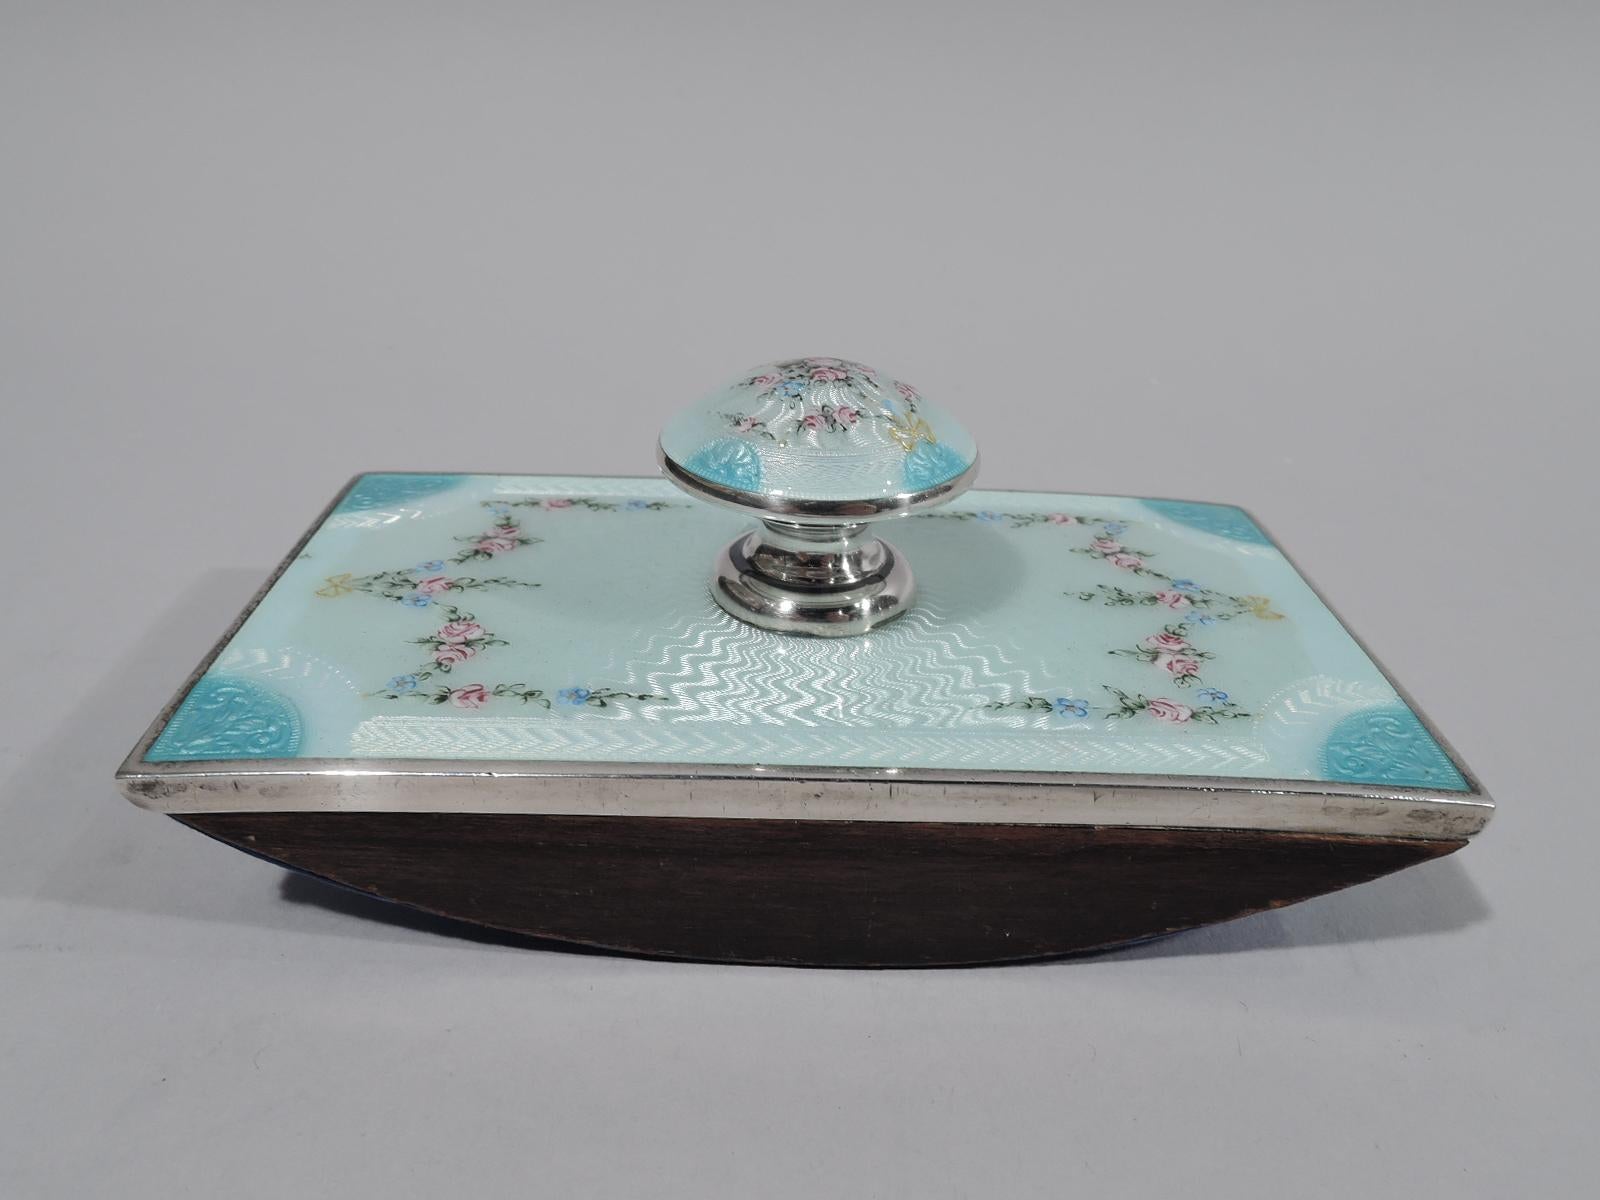 Edwardian Regency sterling silver ink blotter. Made by Foster & Bailey in Providence, circa 1910. Enameled flower garland and basket with gilt bows on whitish concentric waved ground. Sky blue lunettes with leafy scrollwork. A pretty desk accessory.